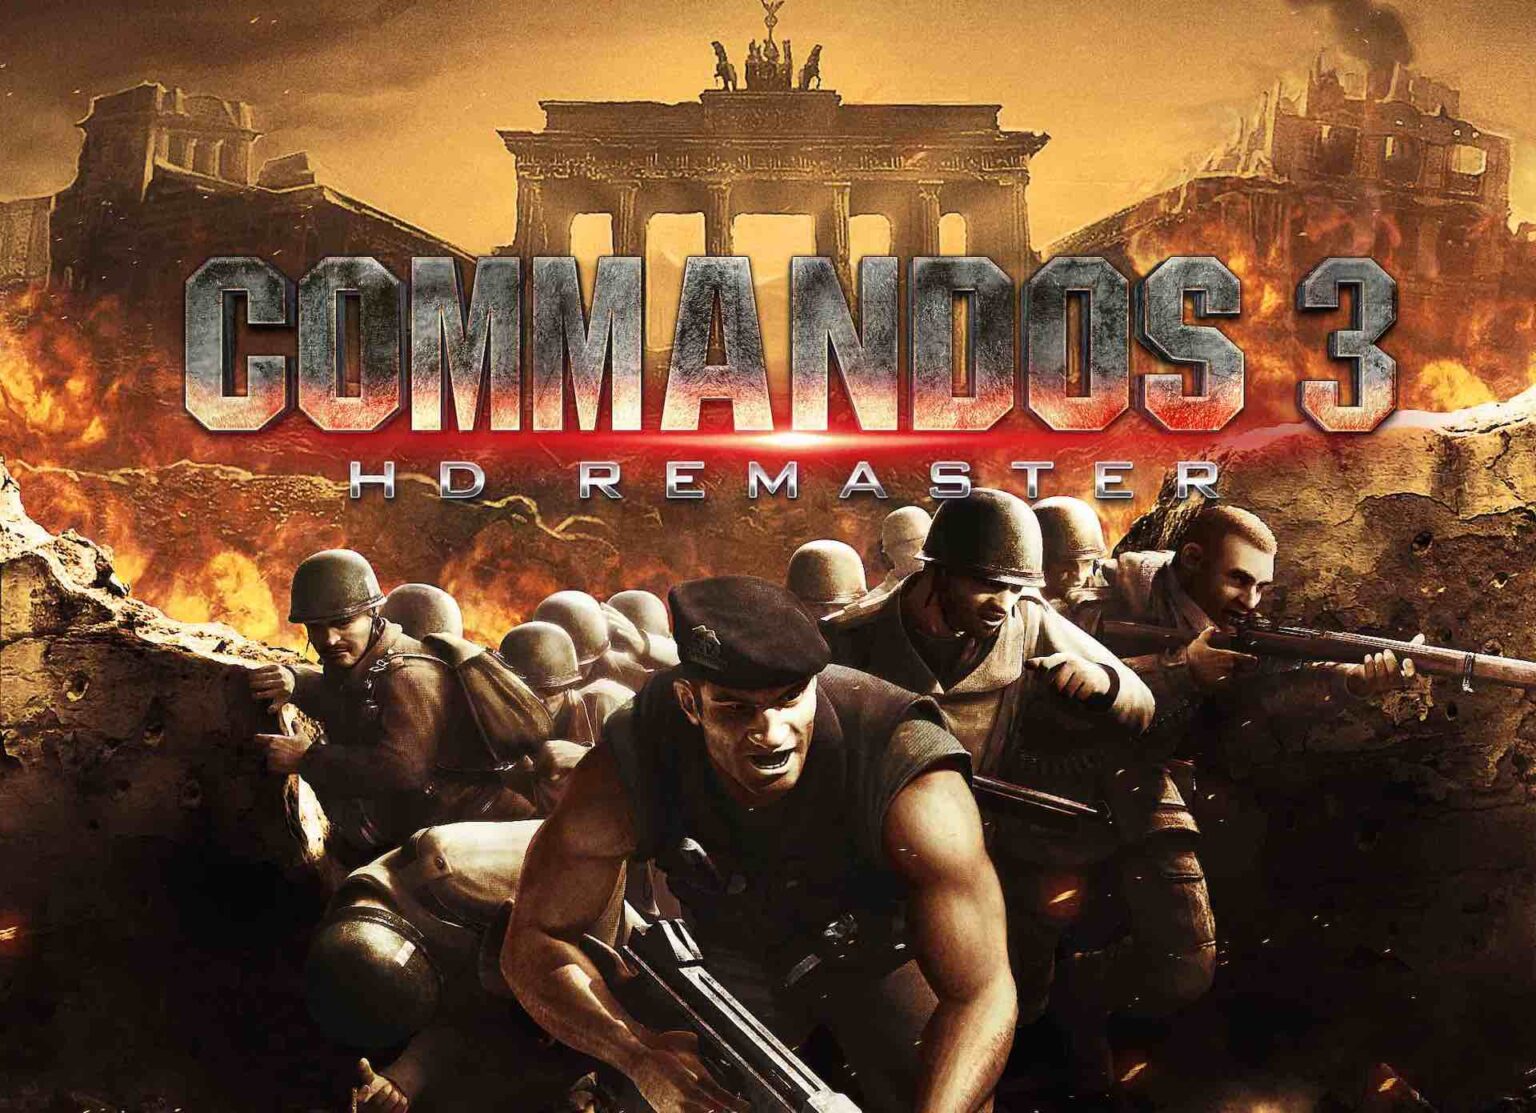 Commandos 3 - HD Remaster | DEMO for apple download free